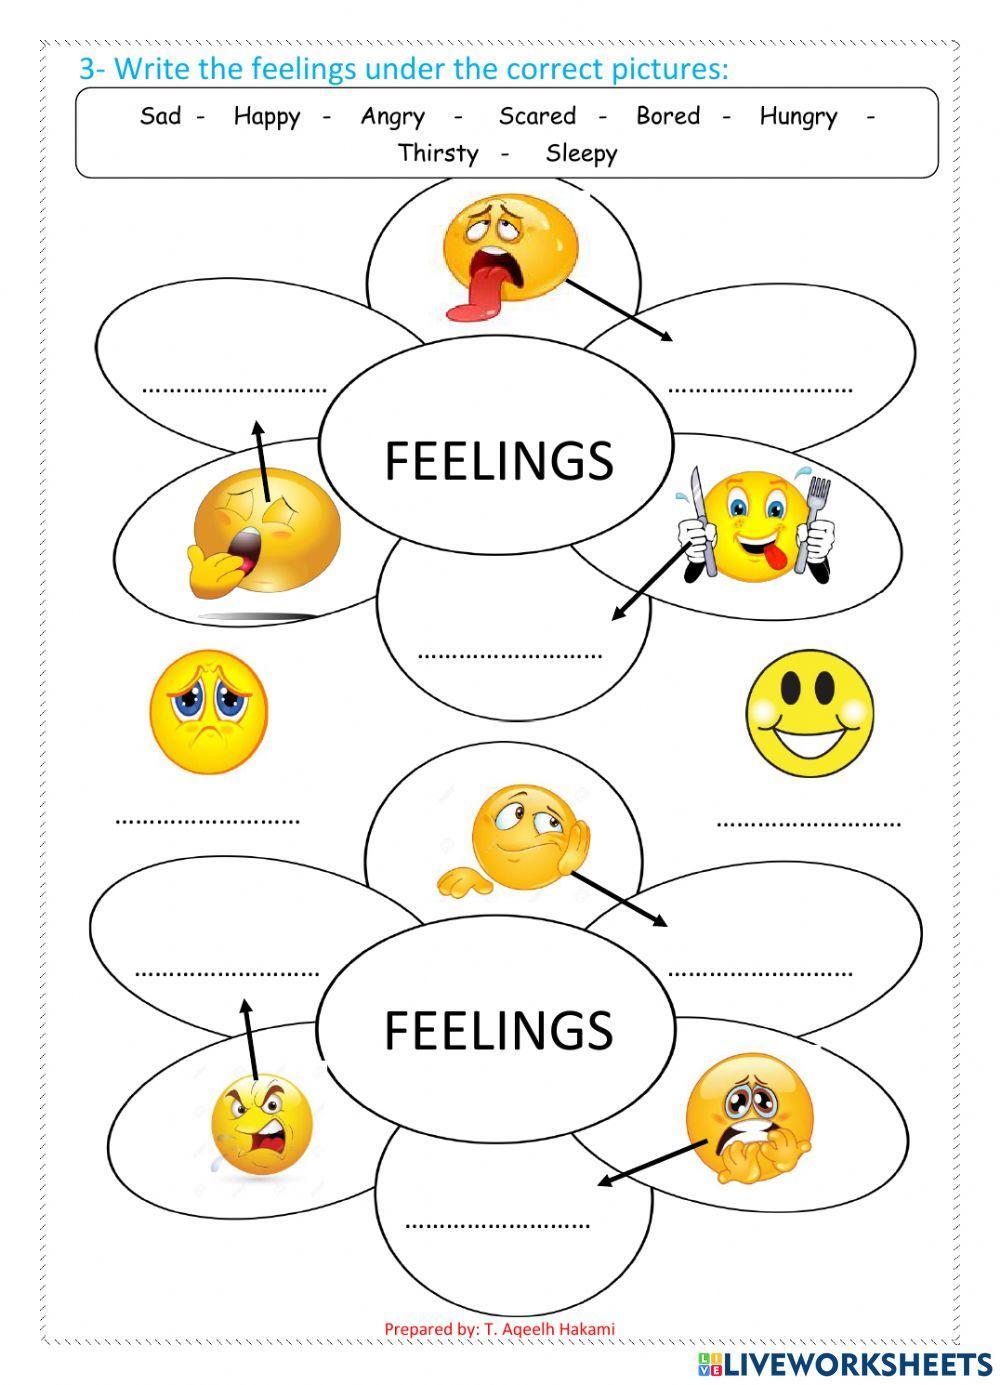 General Summary on feelings and things